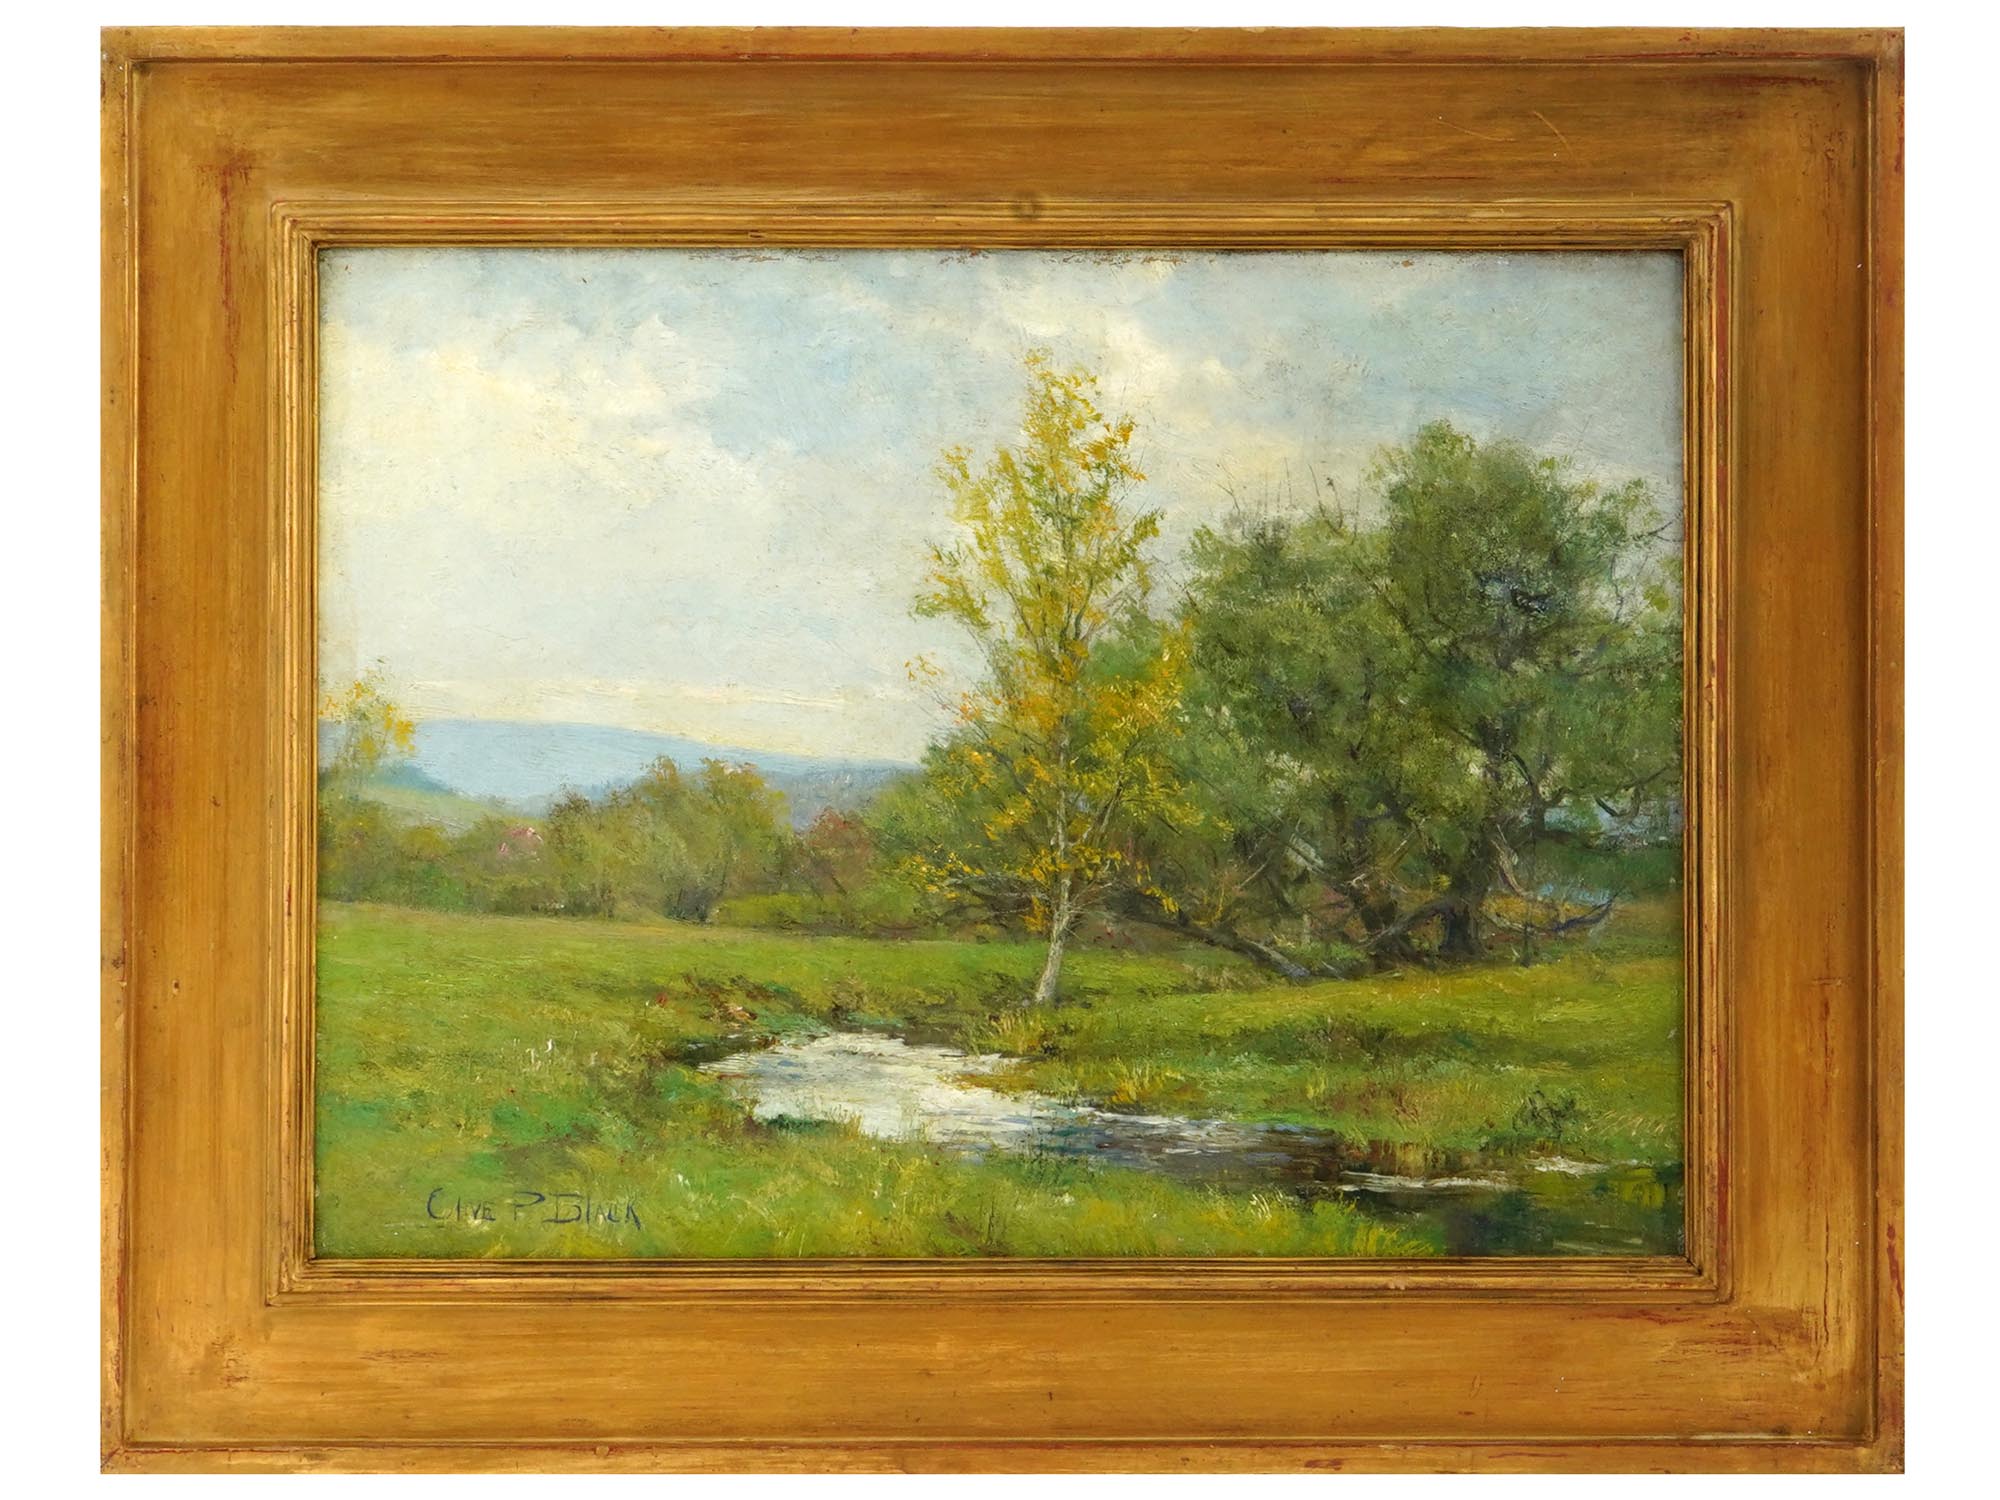 AMERICAN LANDSCAPE OIL PAINTING BY OLIVE P. BLACK PIC-0